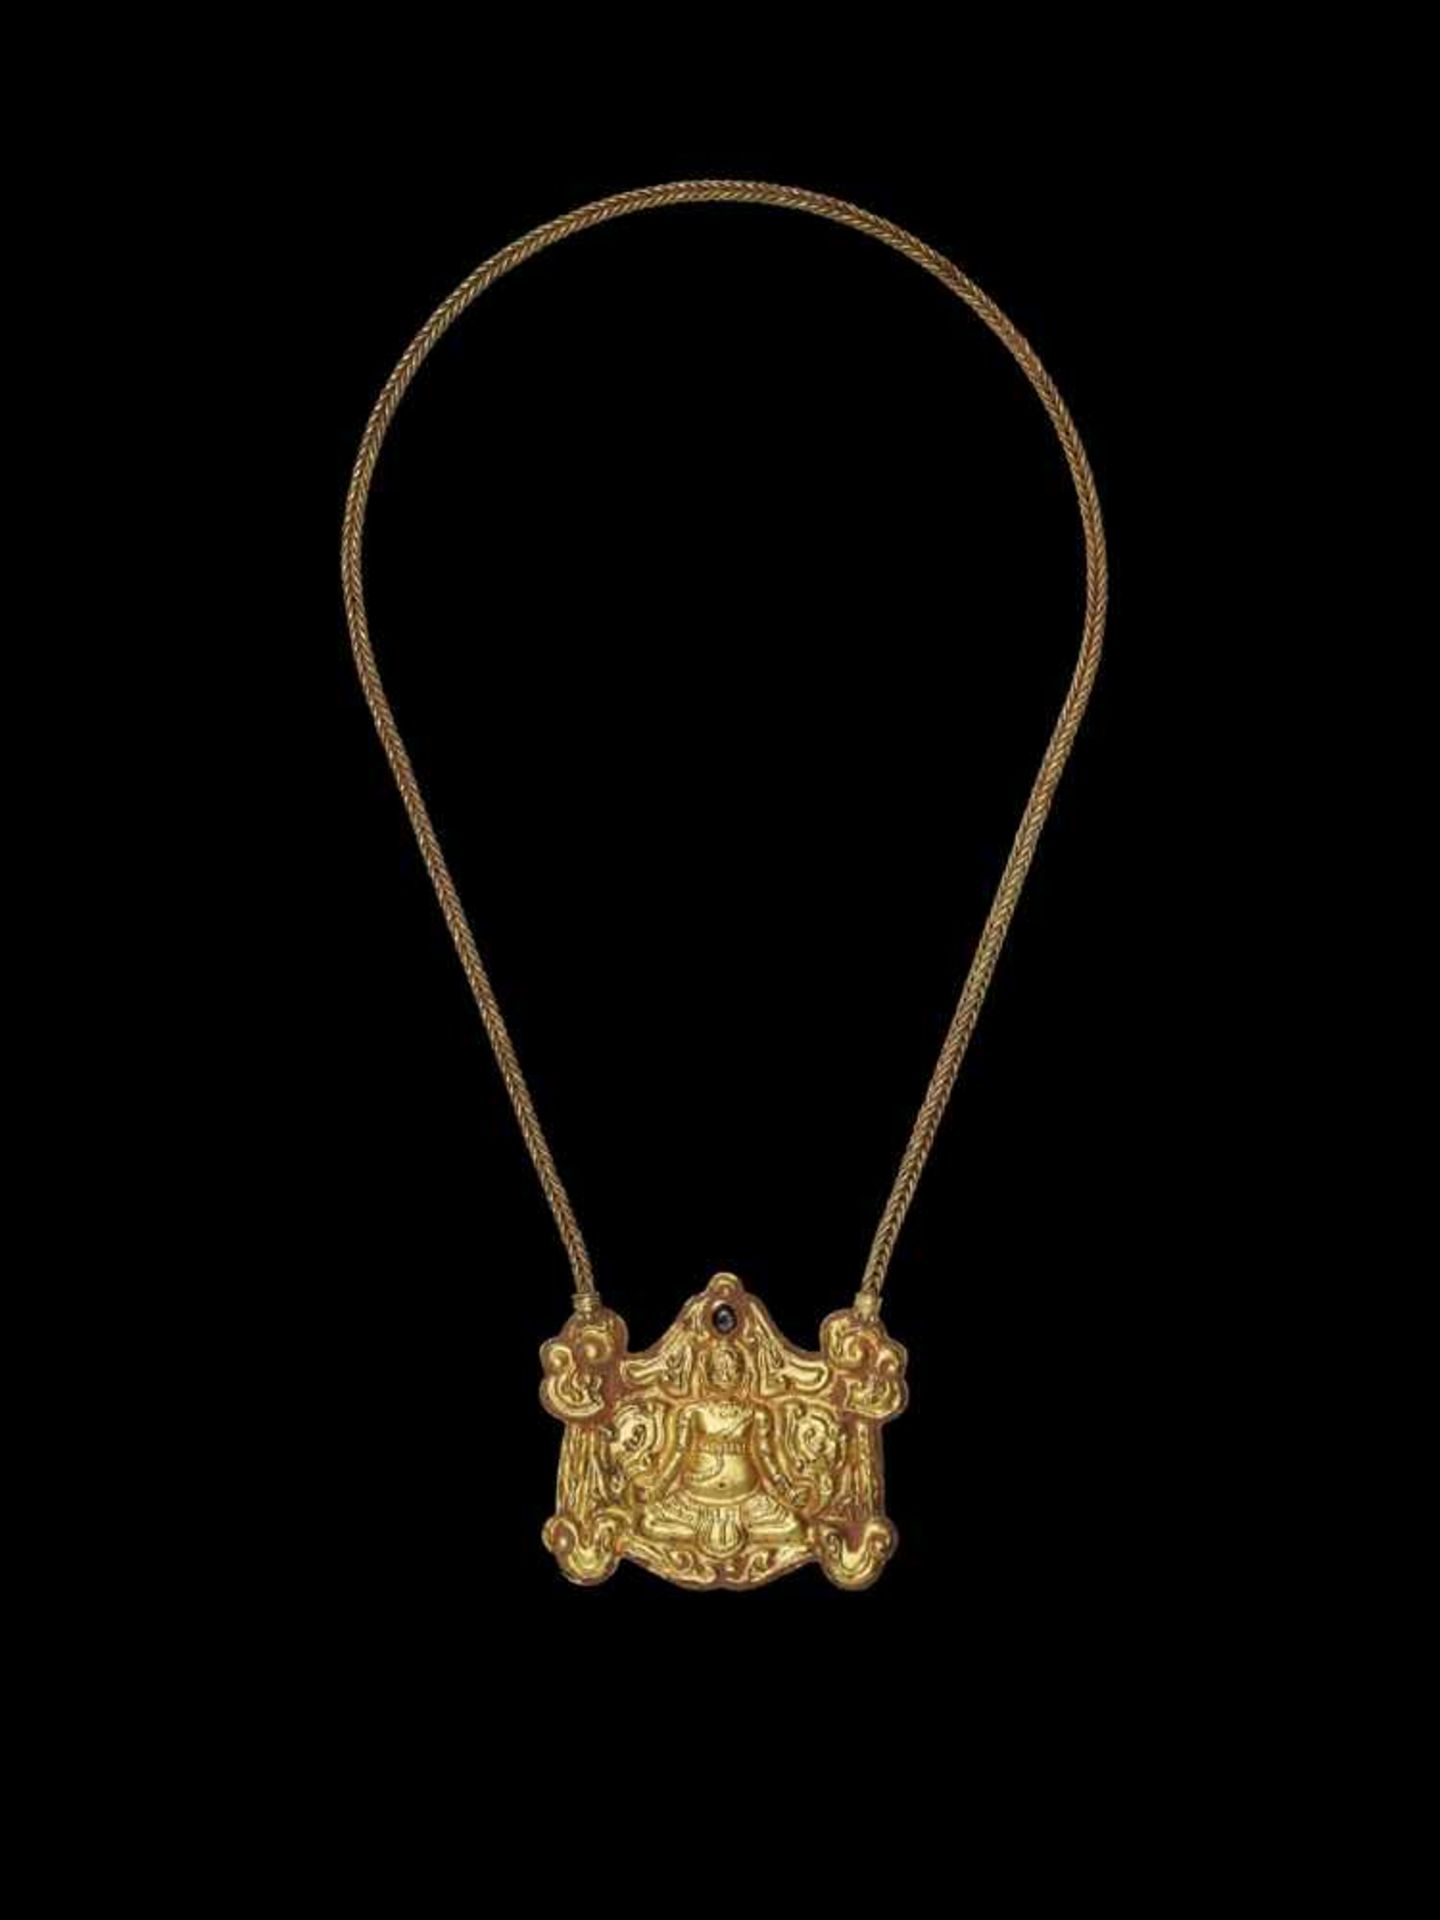 A CHAM REPOUSSÉ GOLD NECKLACE WITH A PECTORAL DEPICTING A SEATED HINDU DEITY Central Cham kingdom,